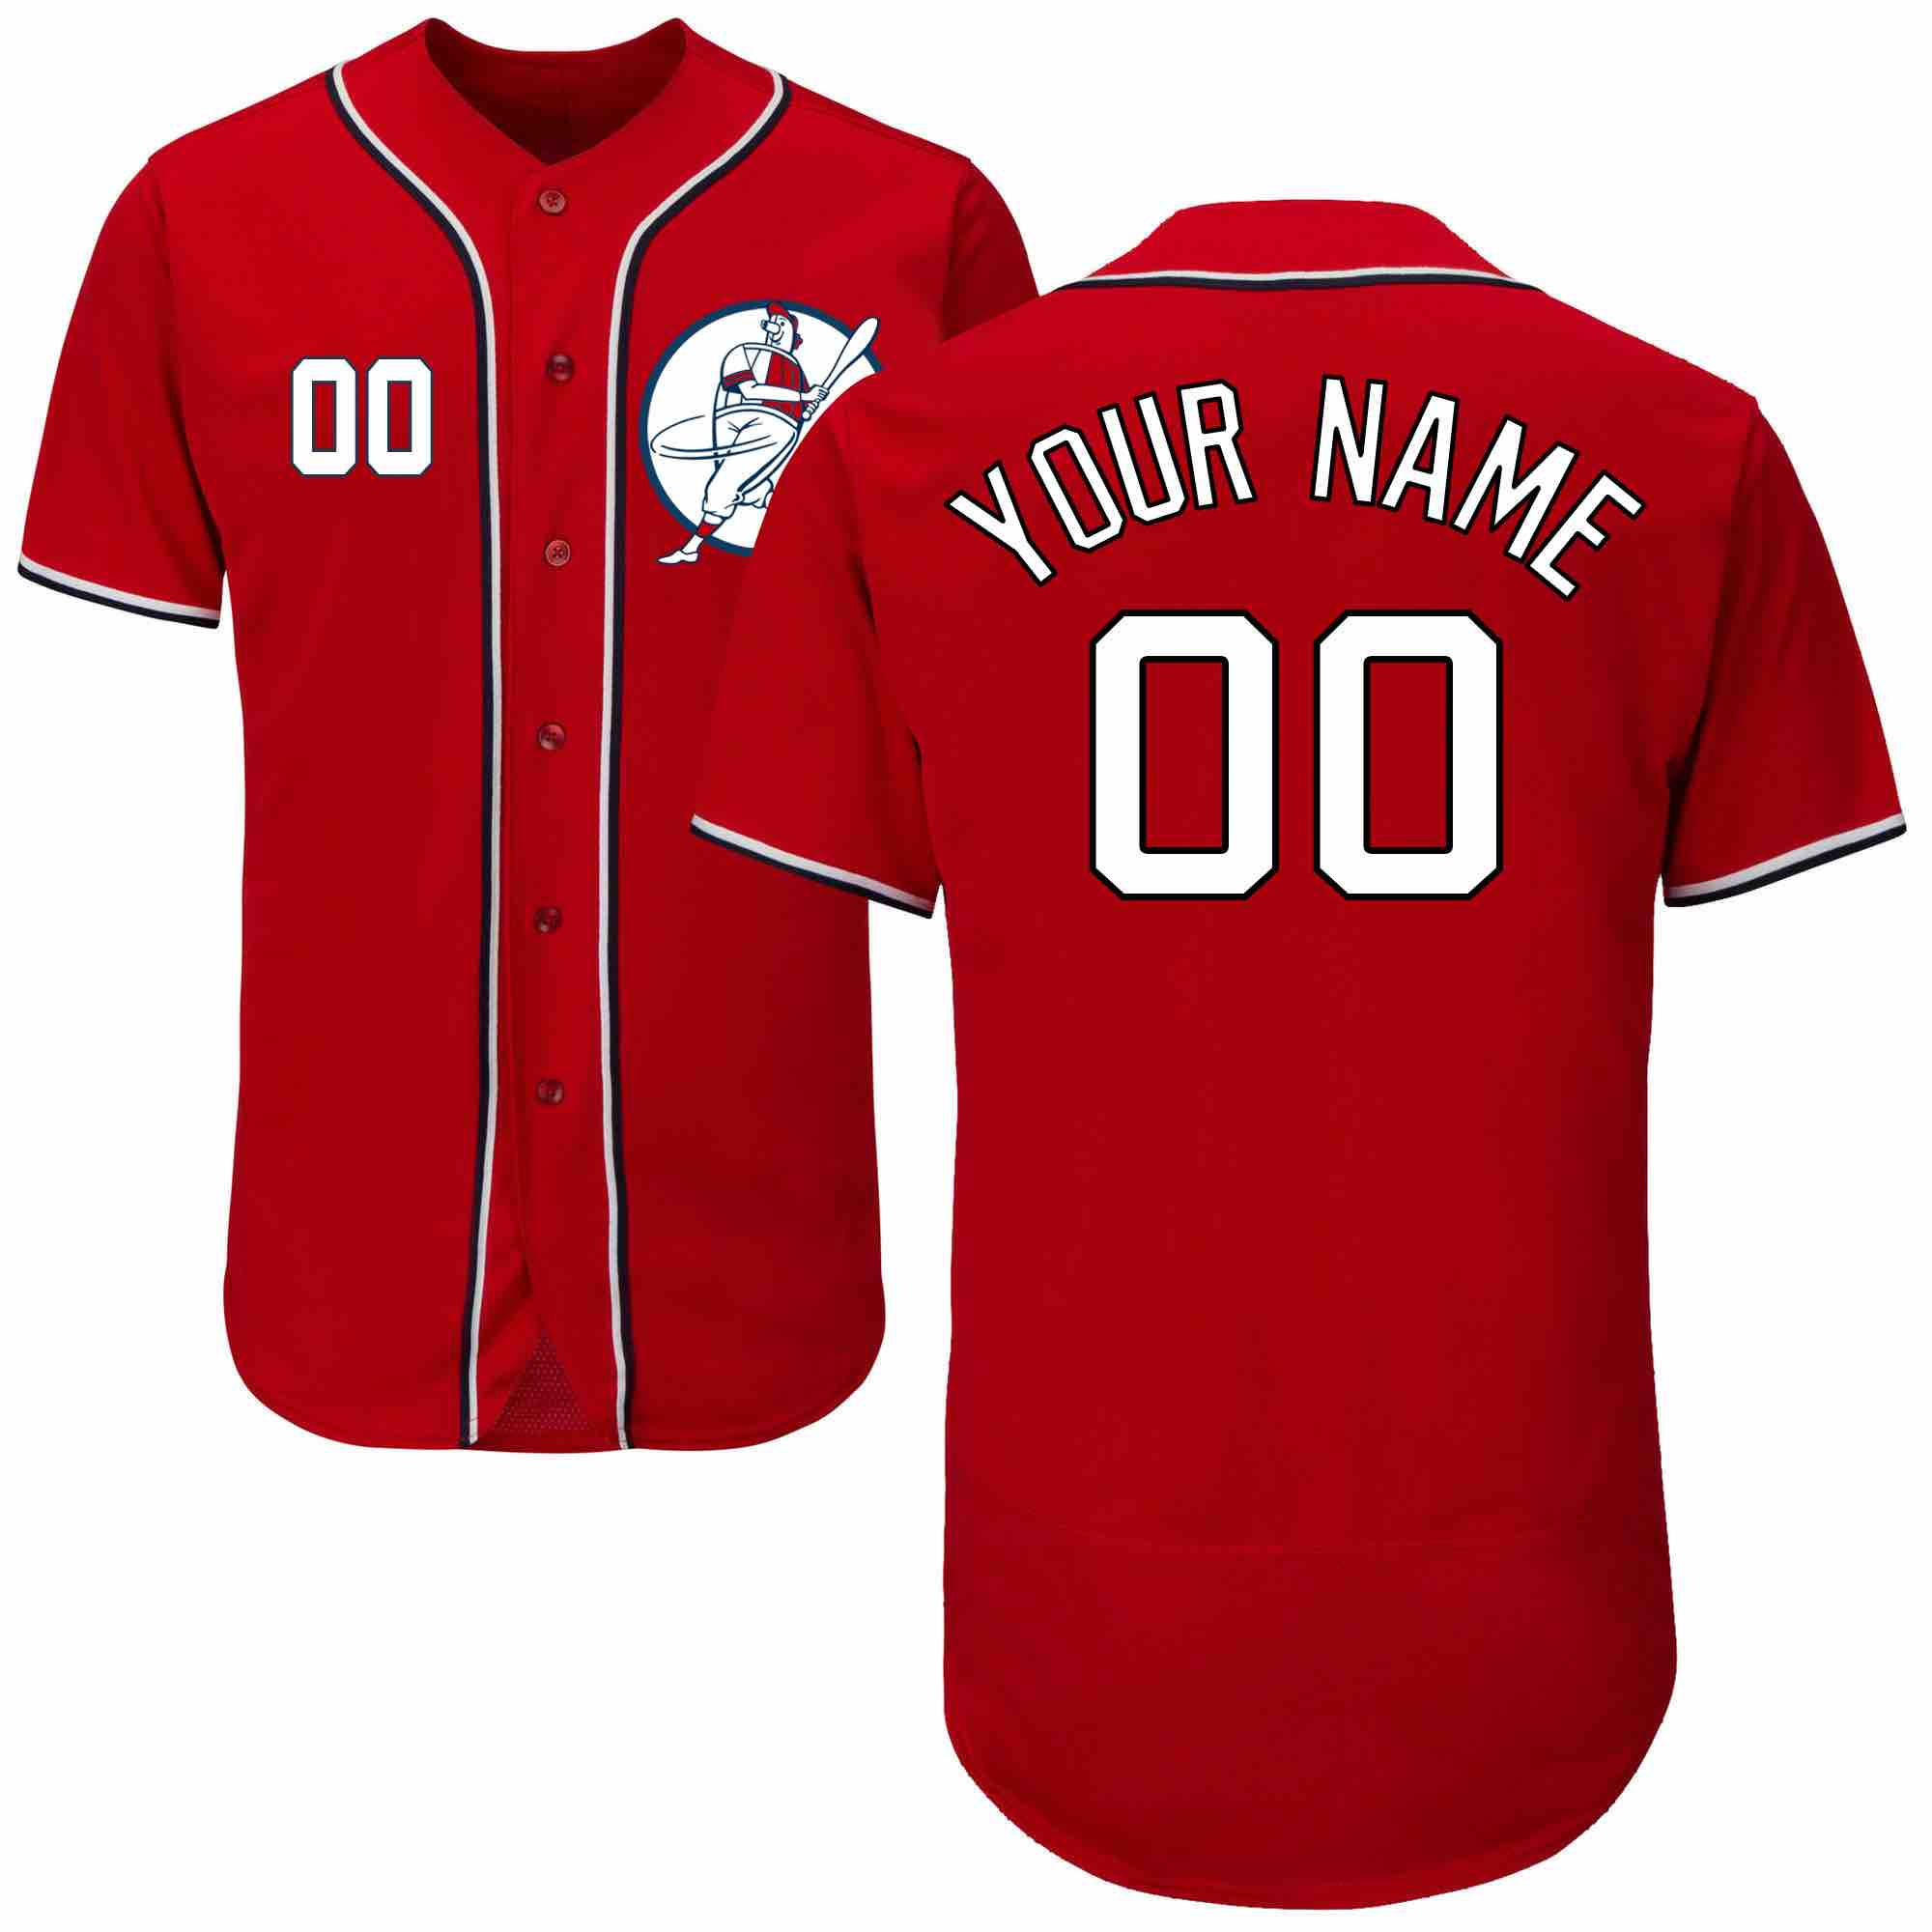 MLB Washington Nationals Personalized Red Color Elite Jersey